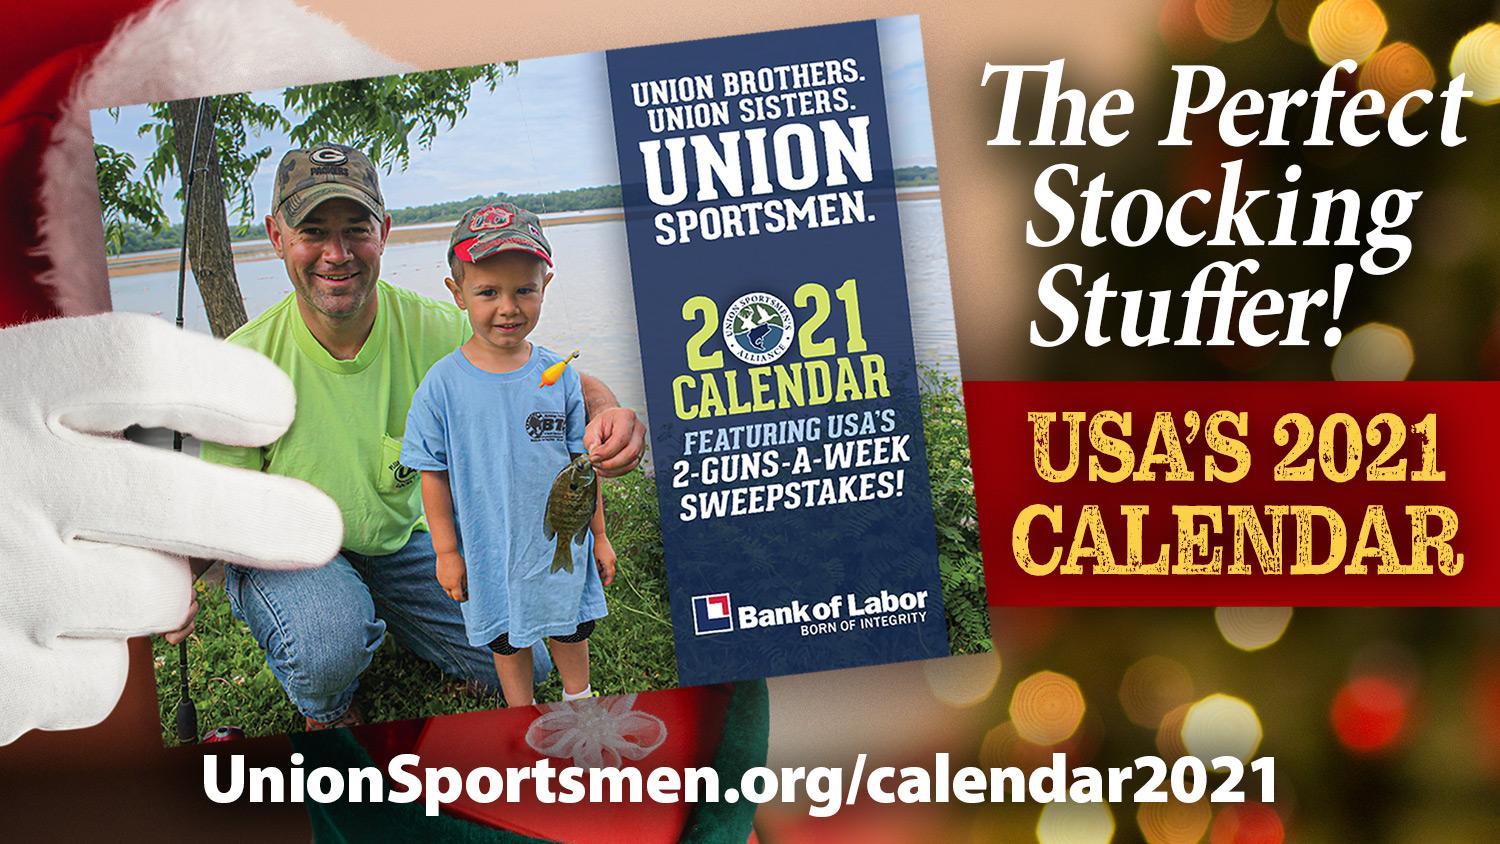 Union Sportsmen Alliance offers local union fundraising and a great